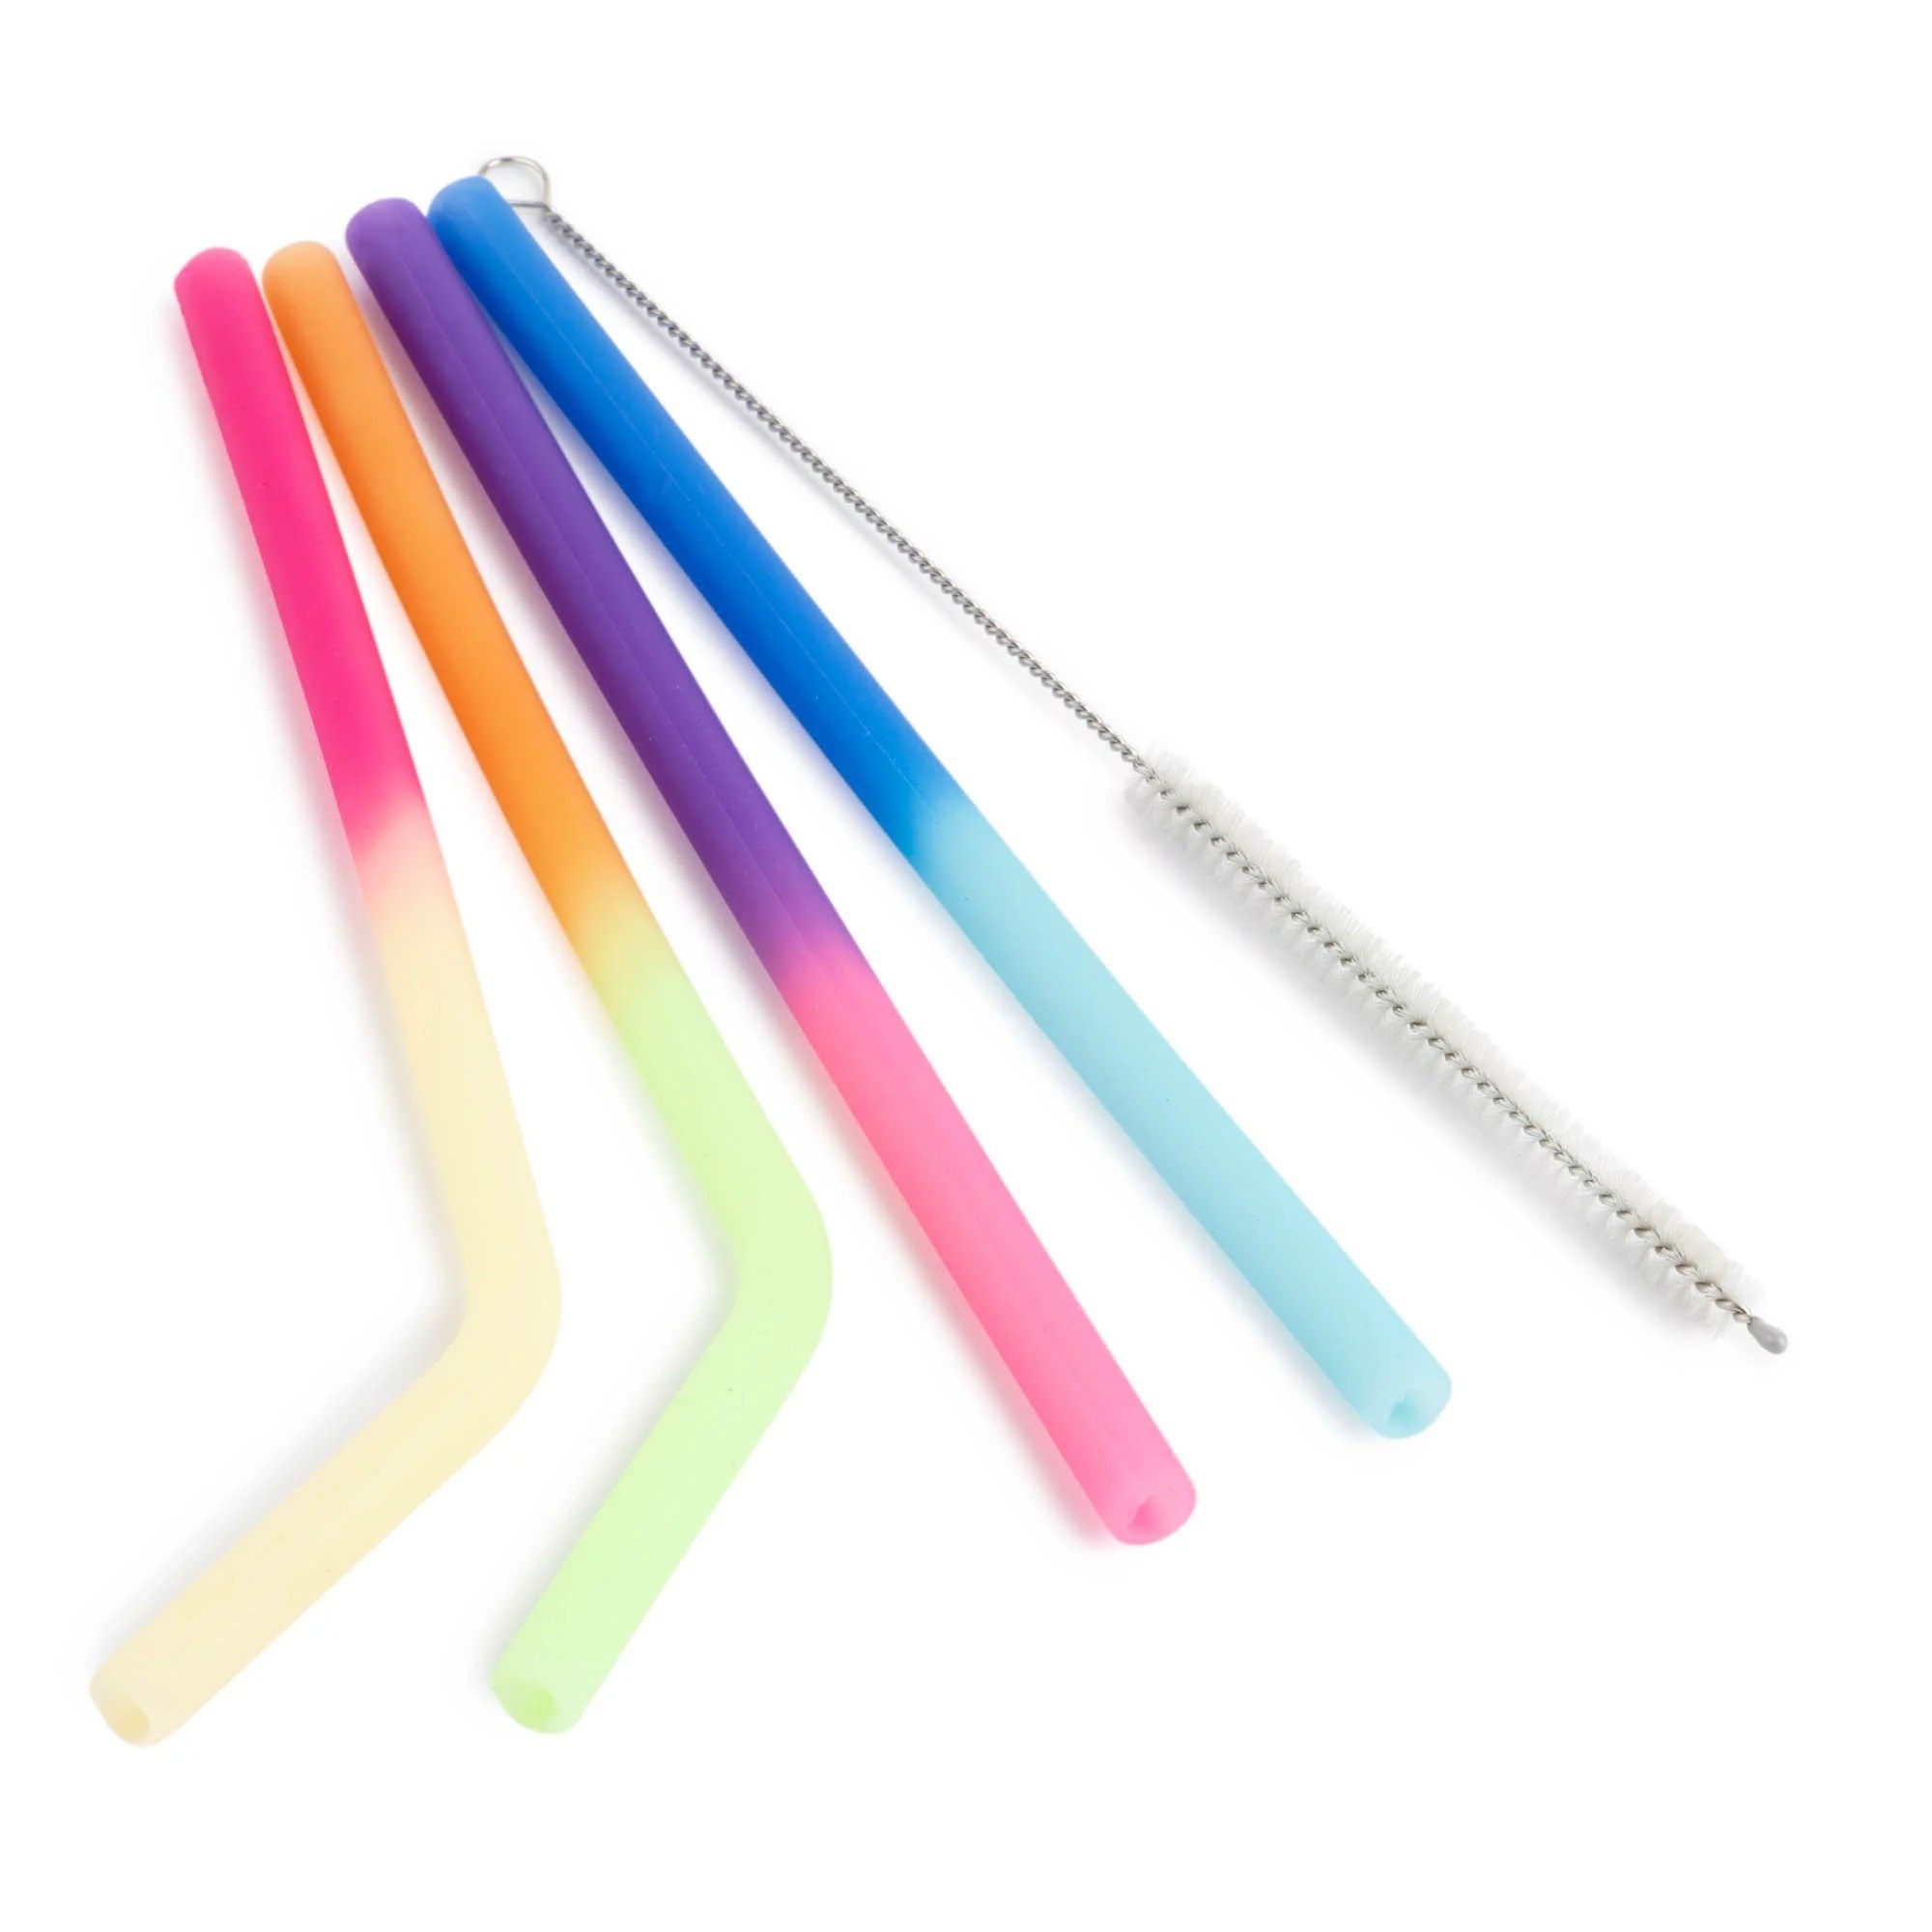 Four color-changing straws and a brush